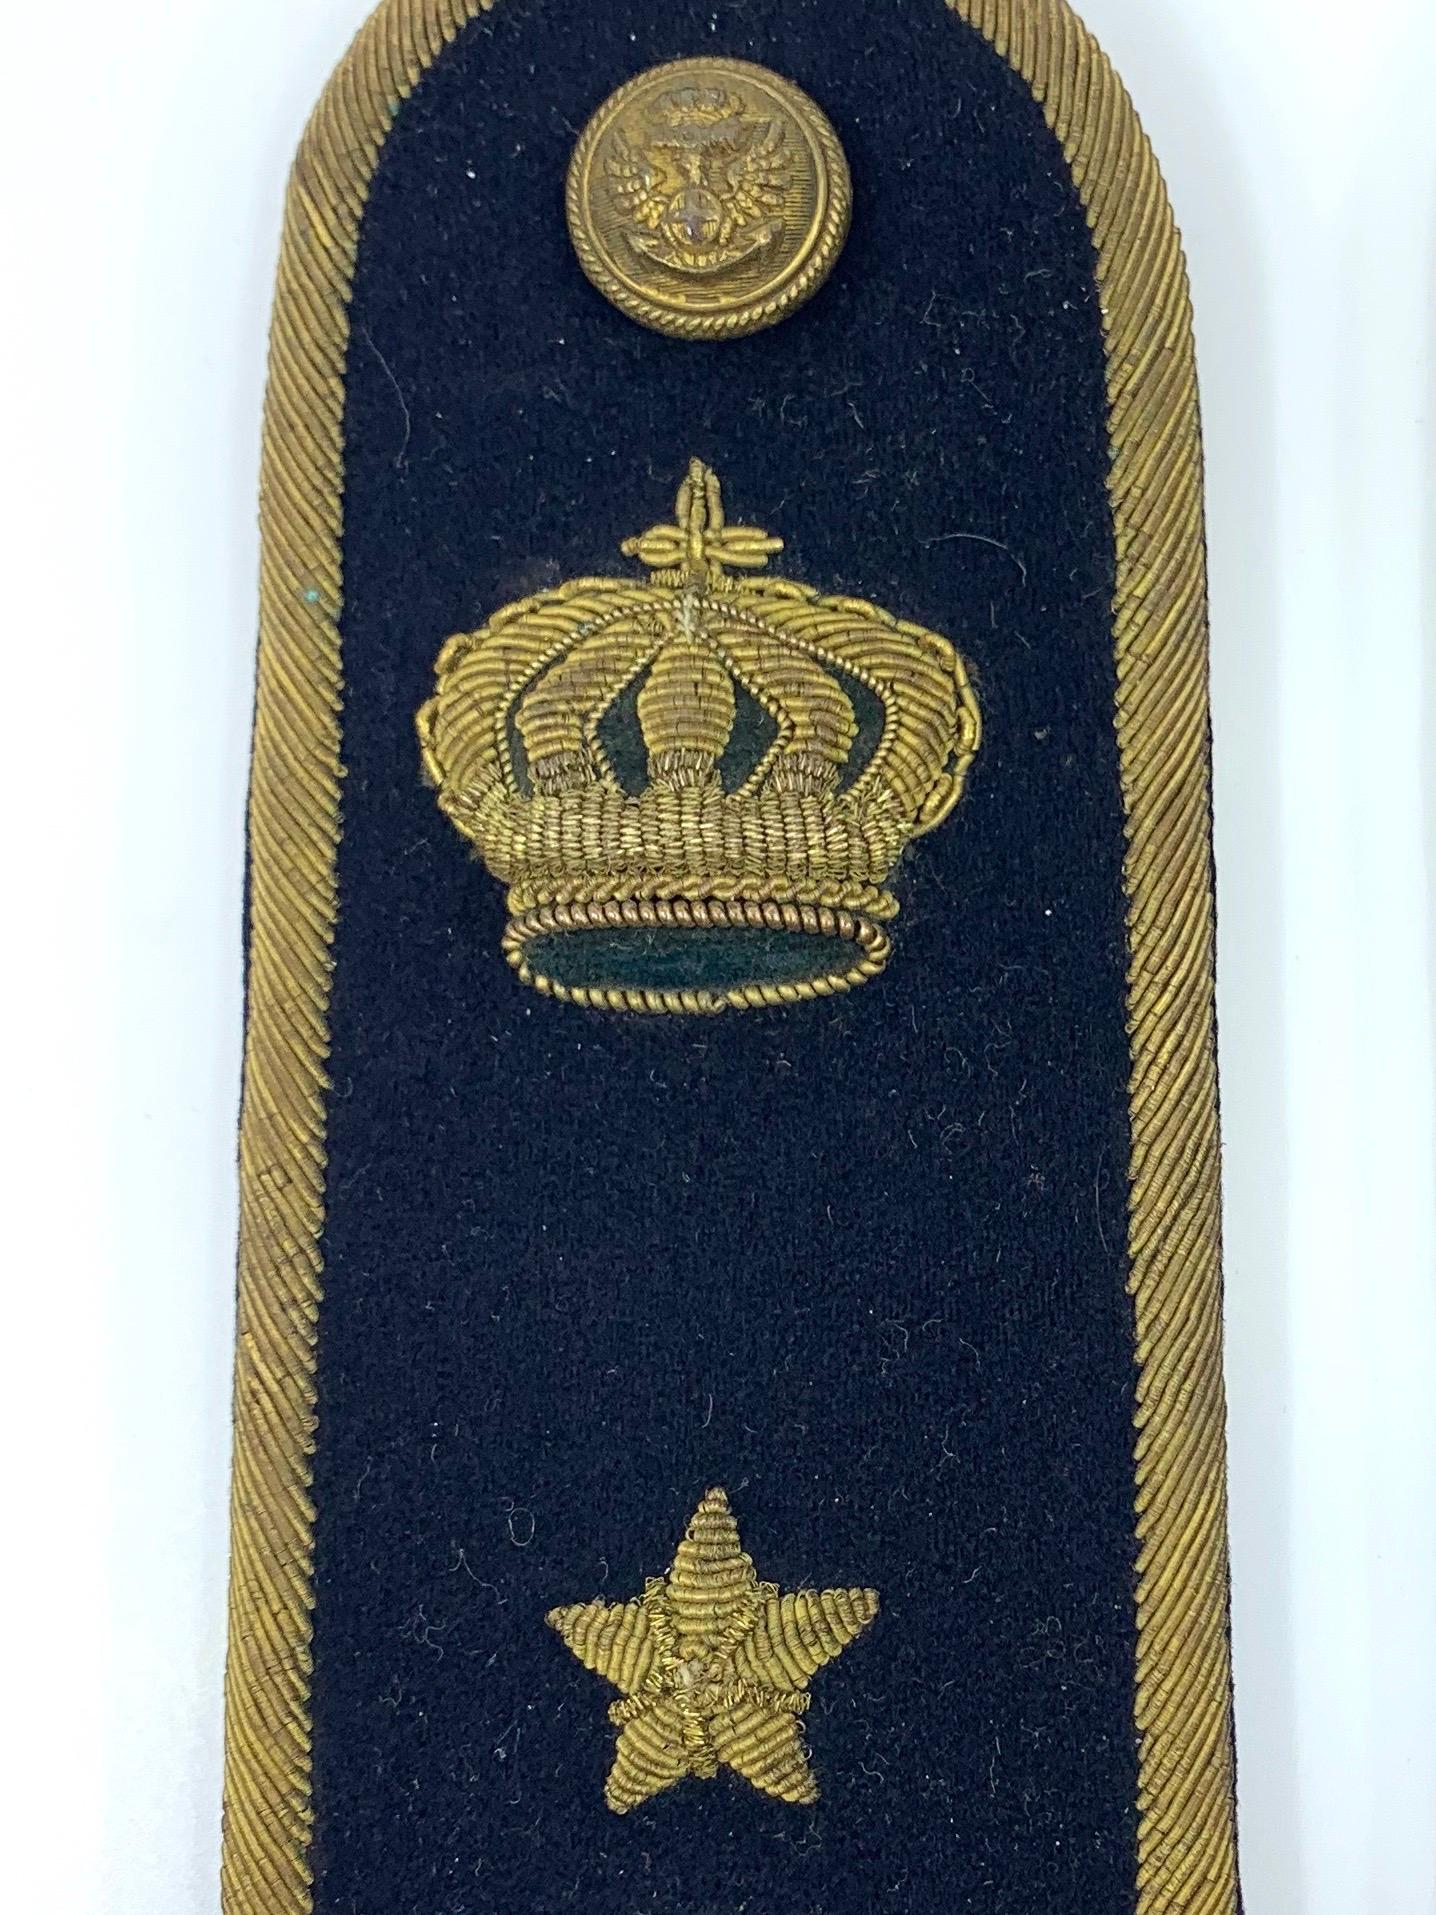 Pair of Italian Military epaulettes. Handsome pair of black and gold thread stitched functioning naval epaulettes with the crown of Savoy, stars and brass eagle buttons and hardware, Italy, circa 1930s.
Dimensions: 5.25